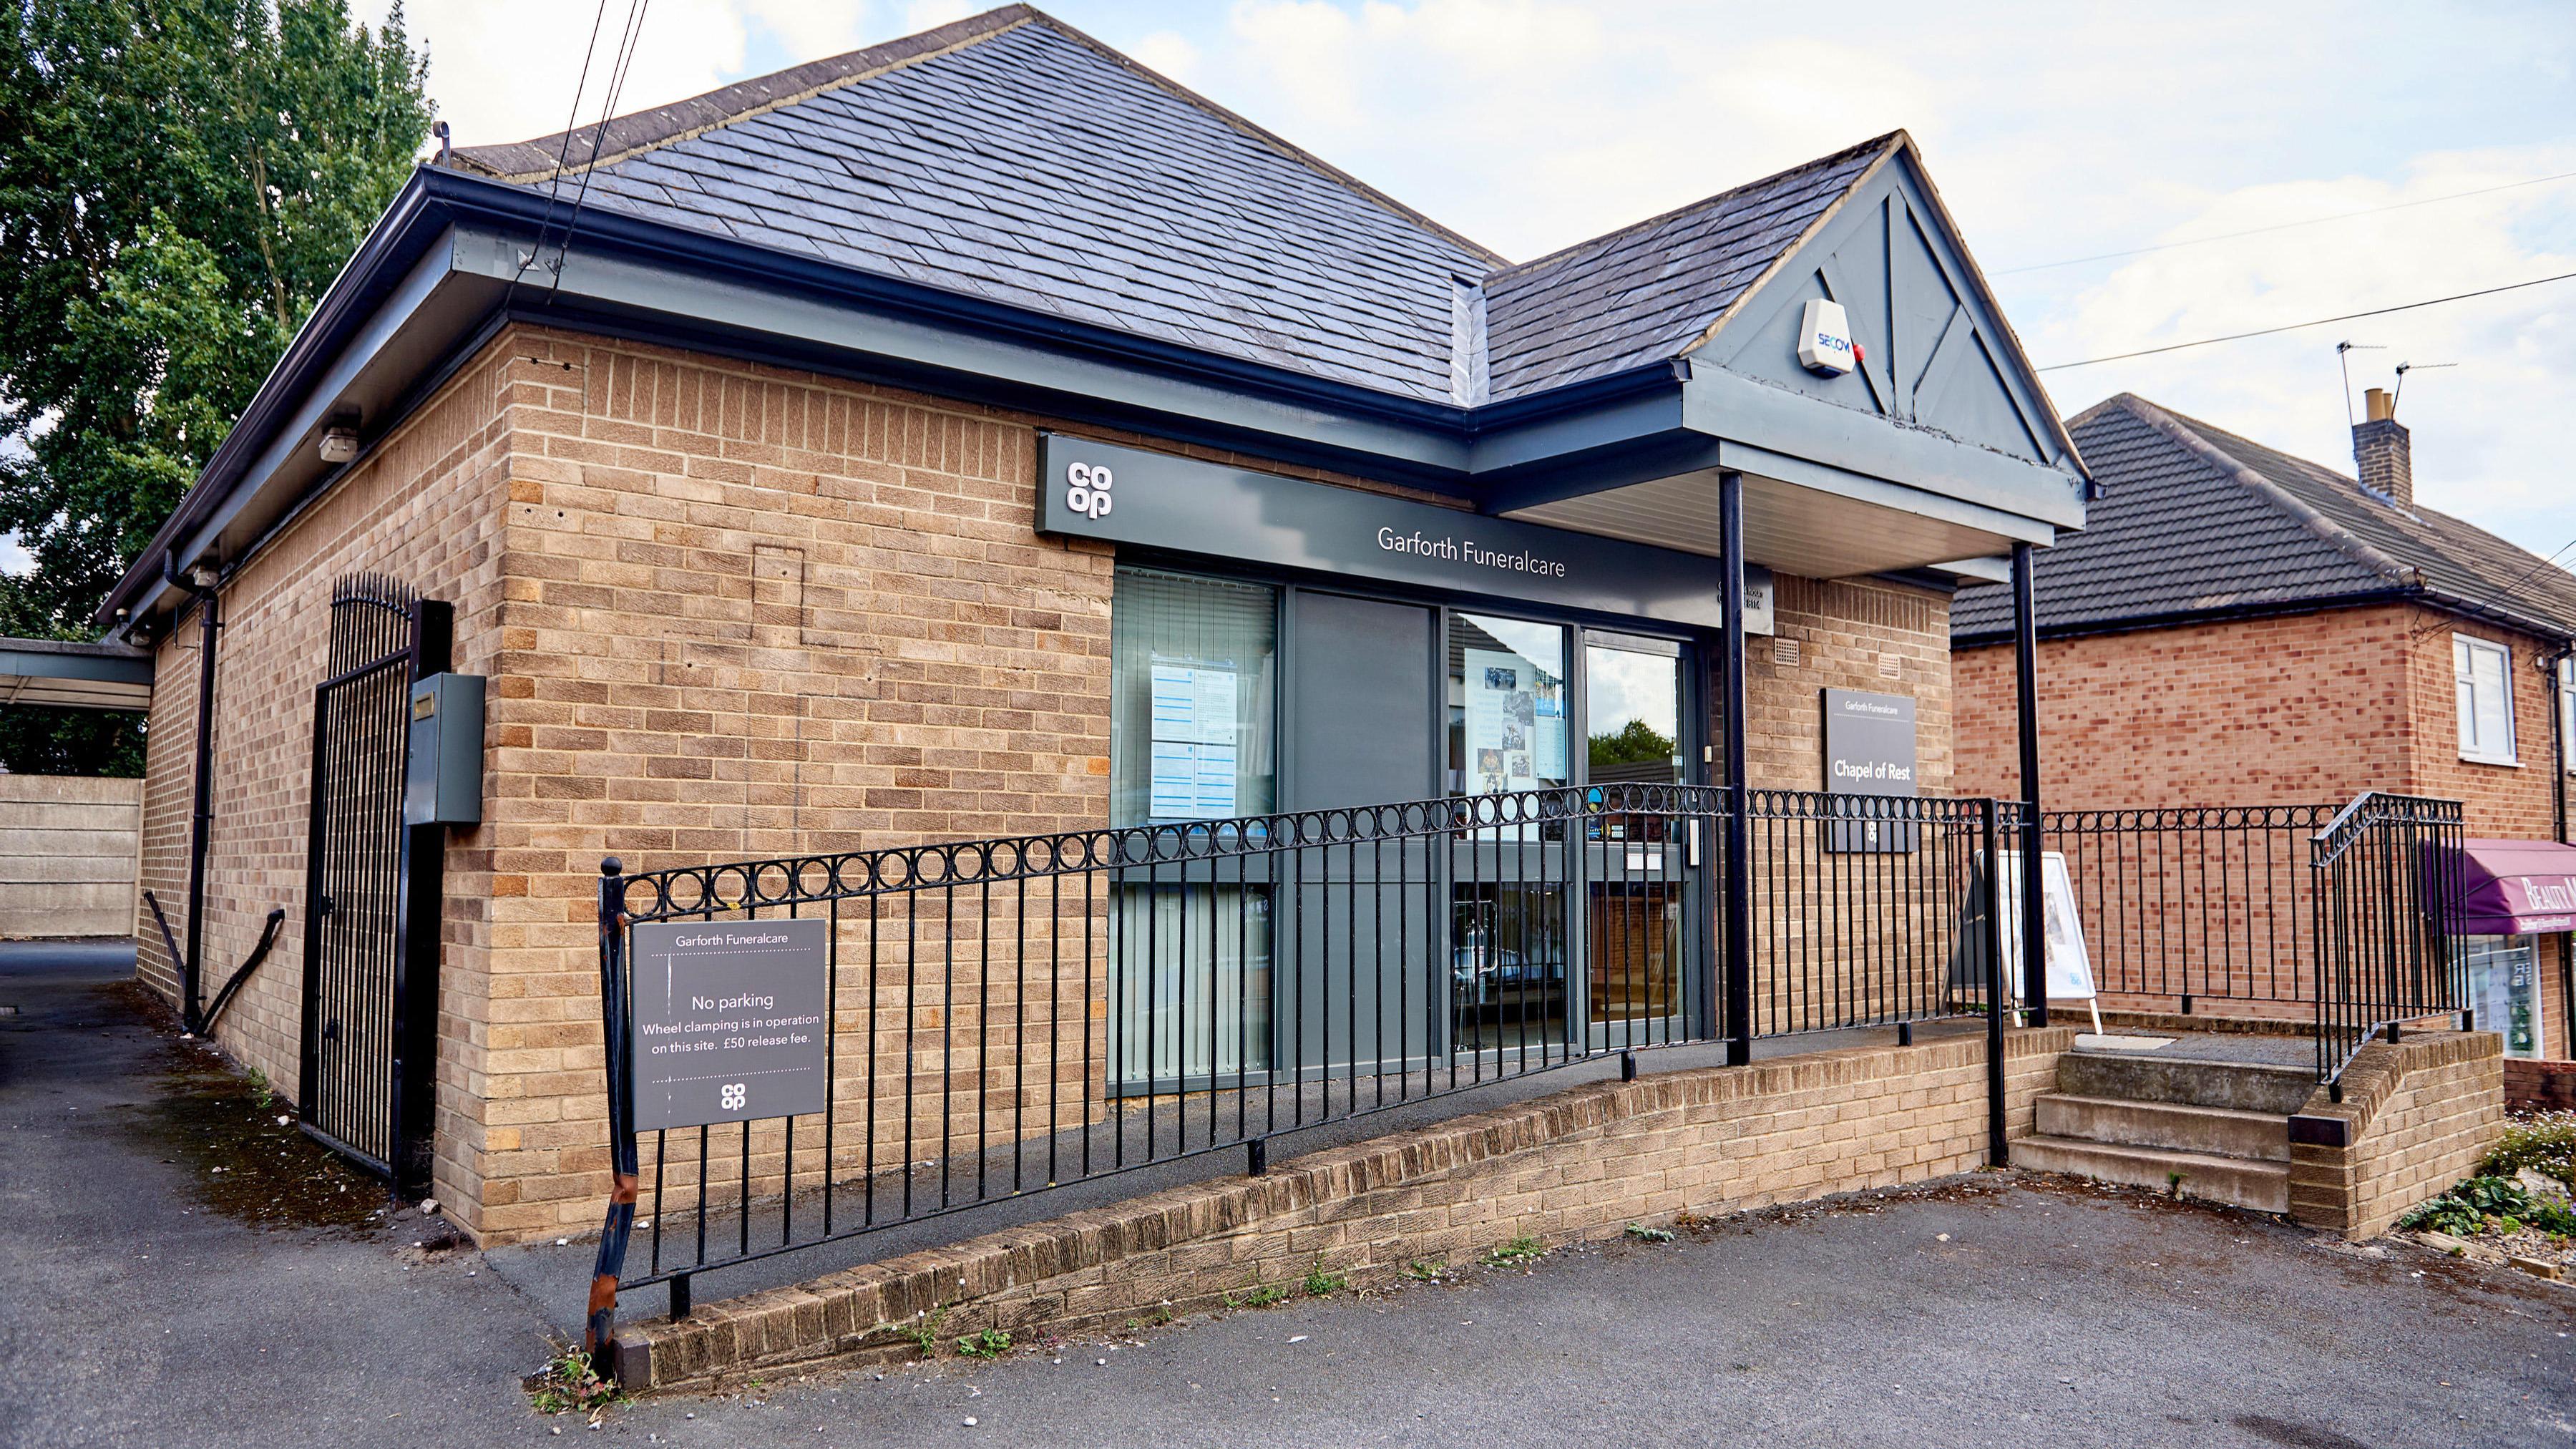 Images Garforth Funeralcare